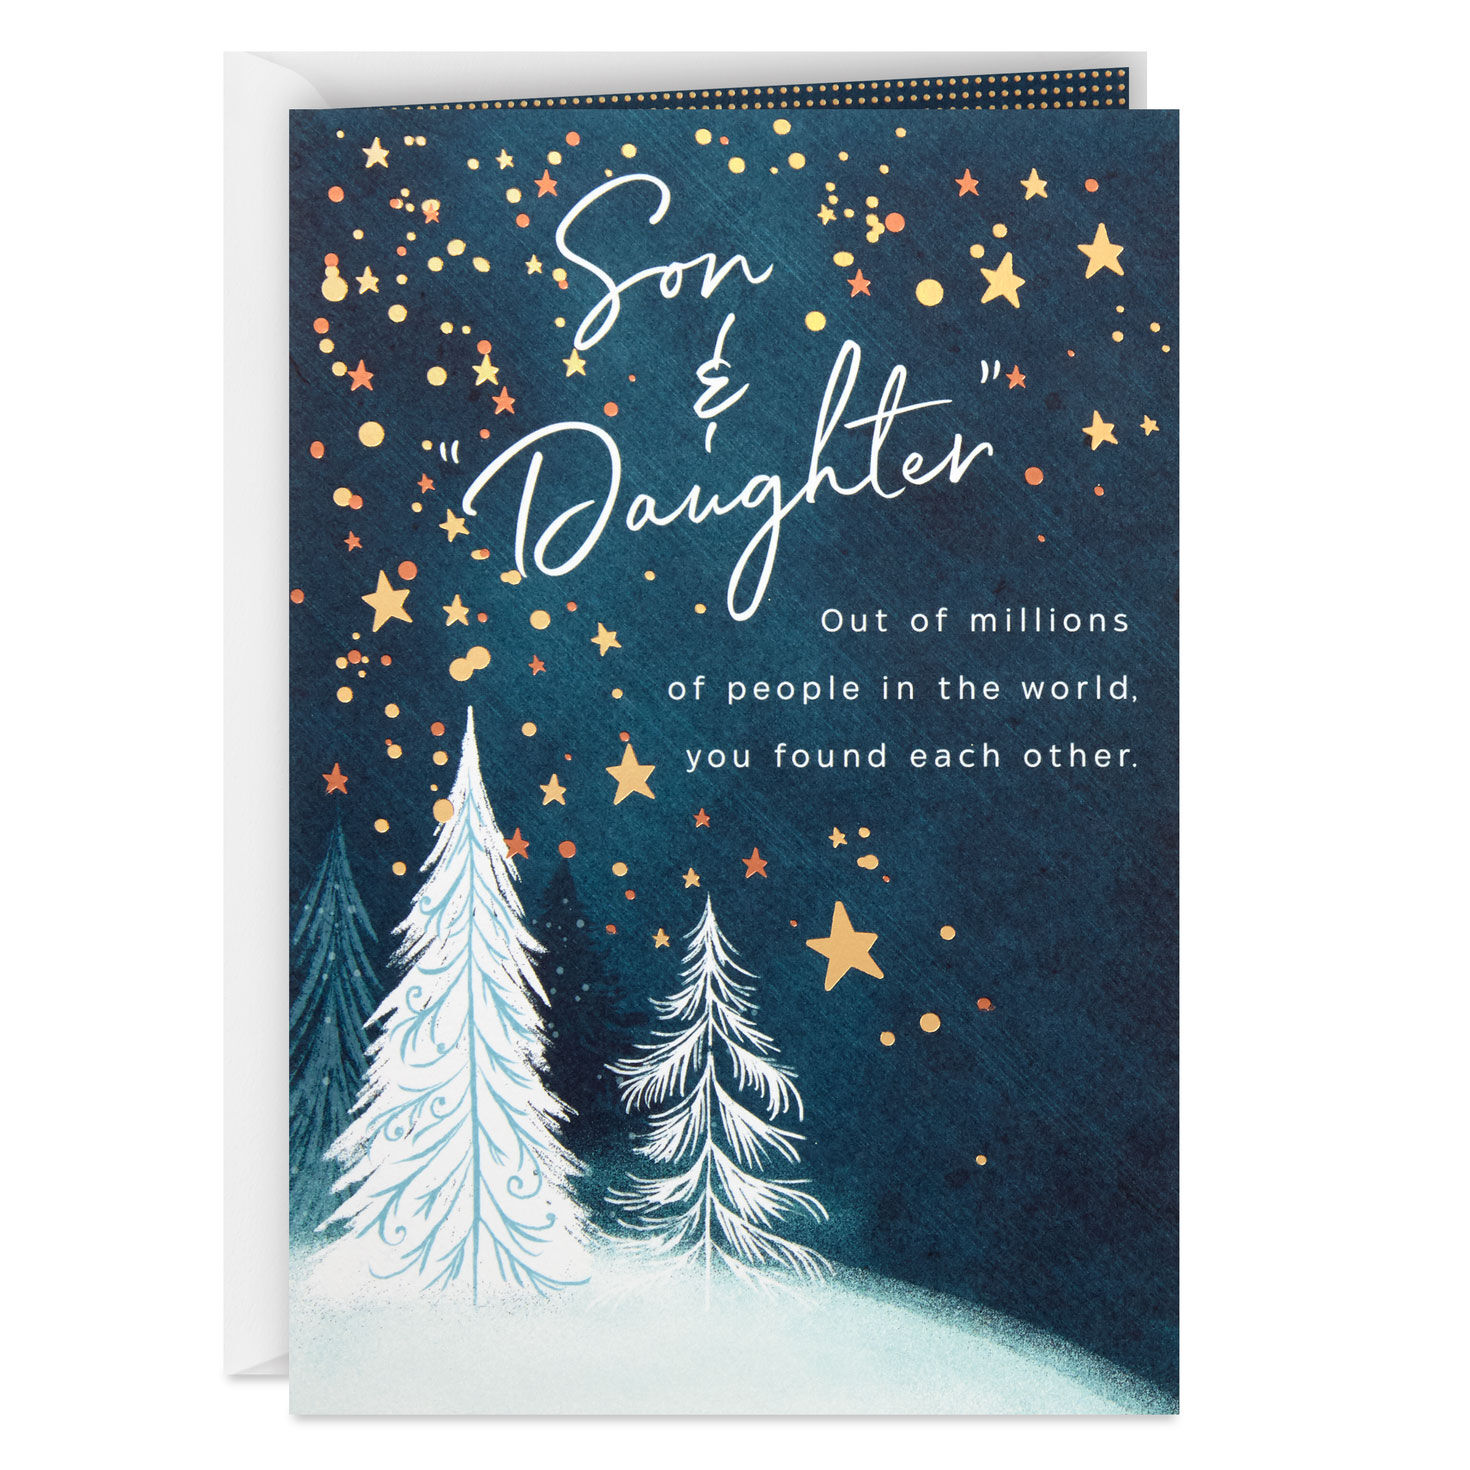 With Love DAUGHTER AND SON-IN-LAW Quality Christmas Card Tree Design 